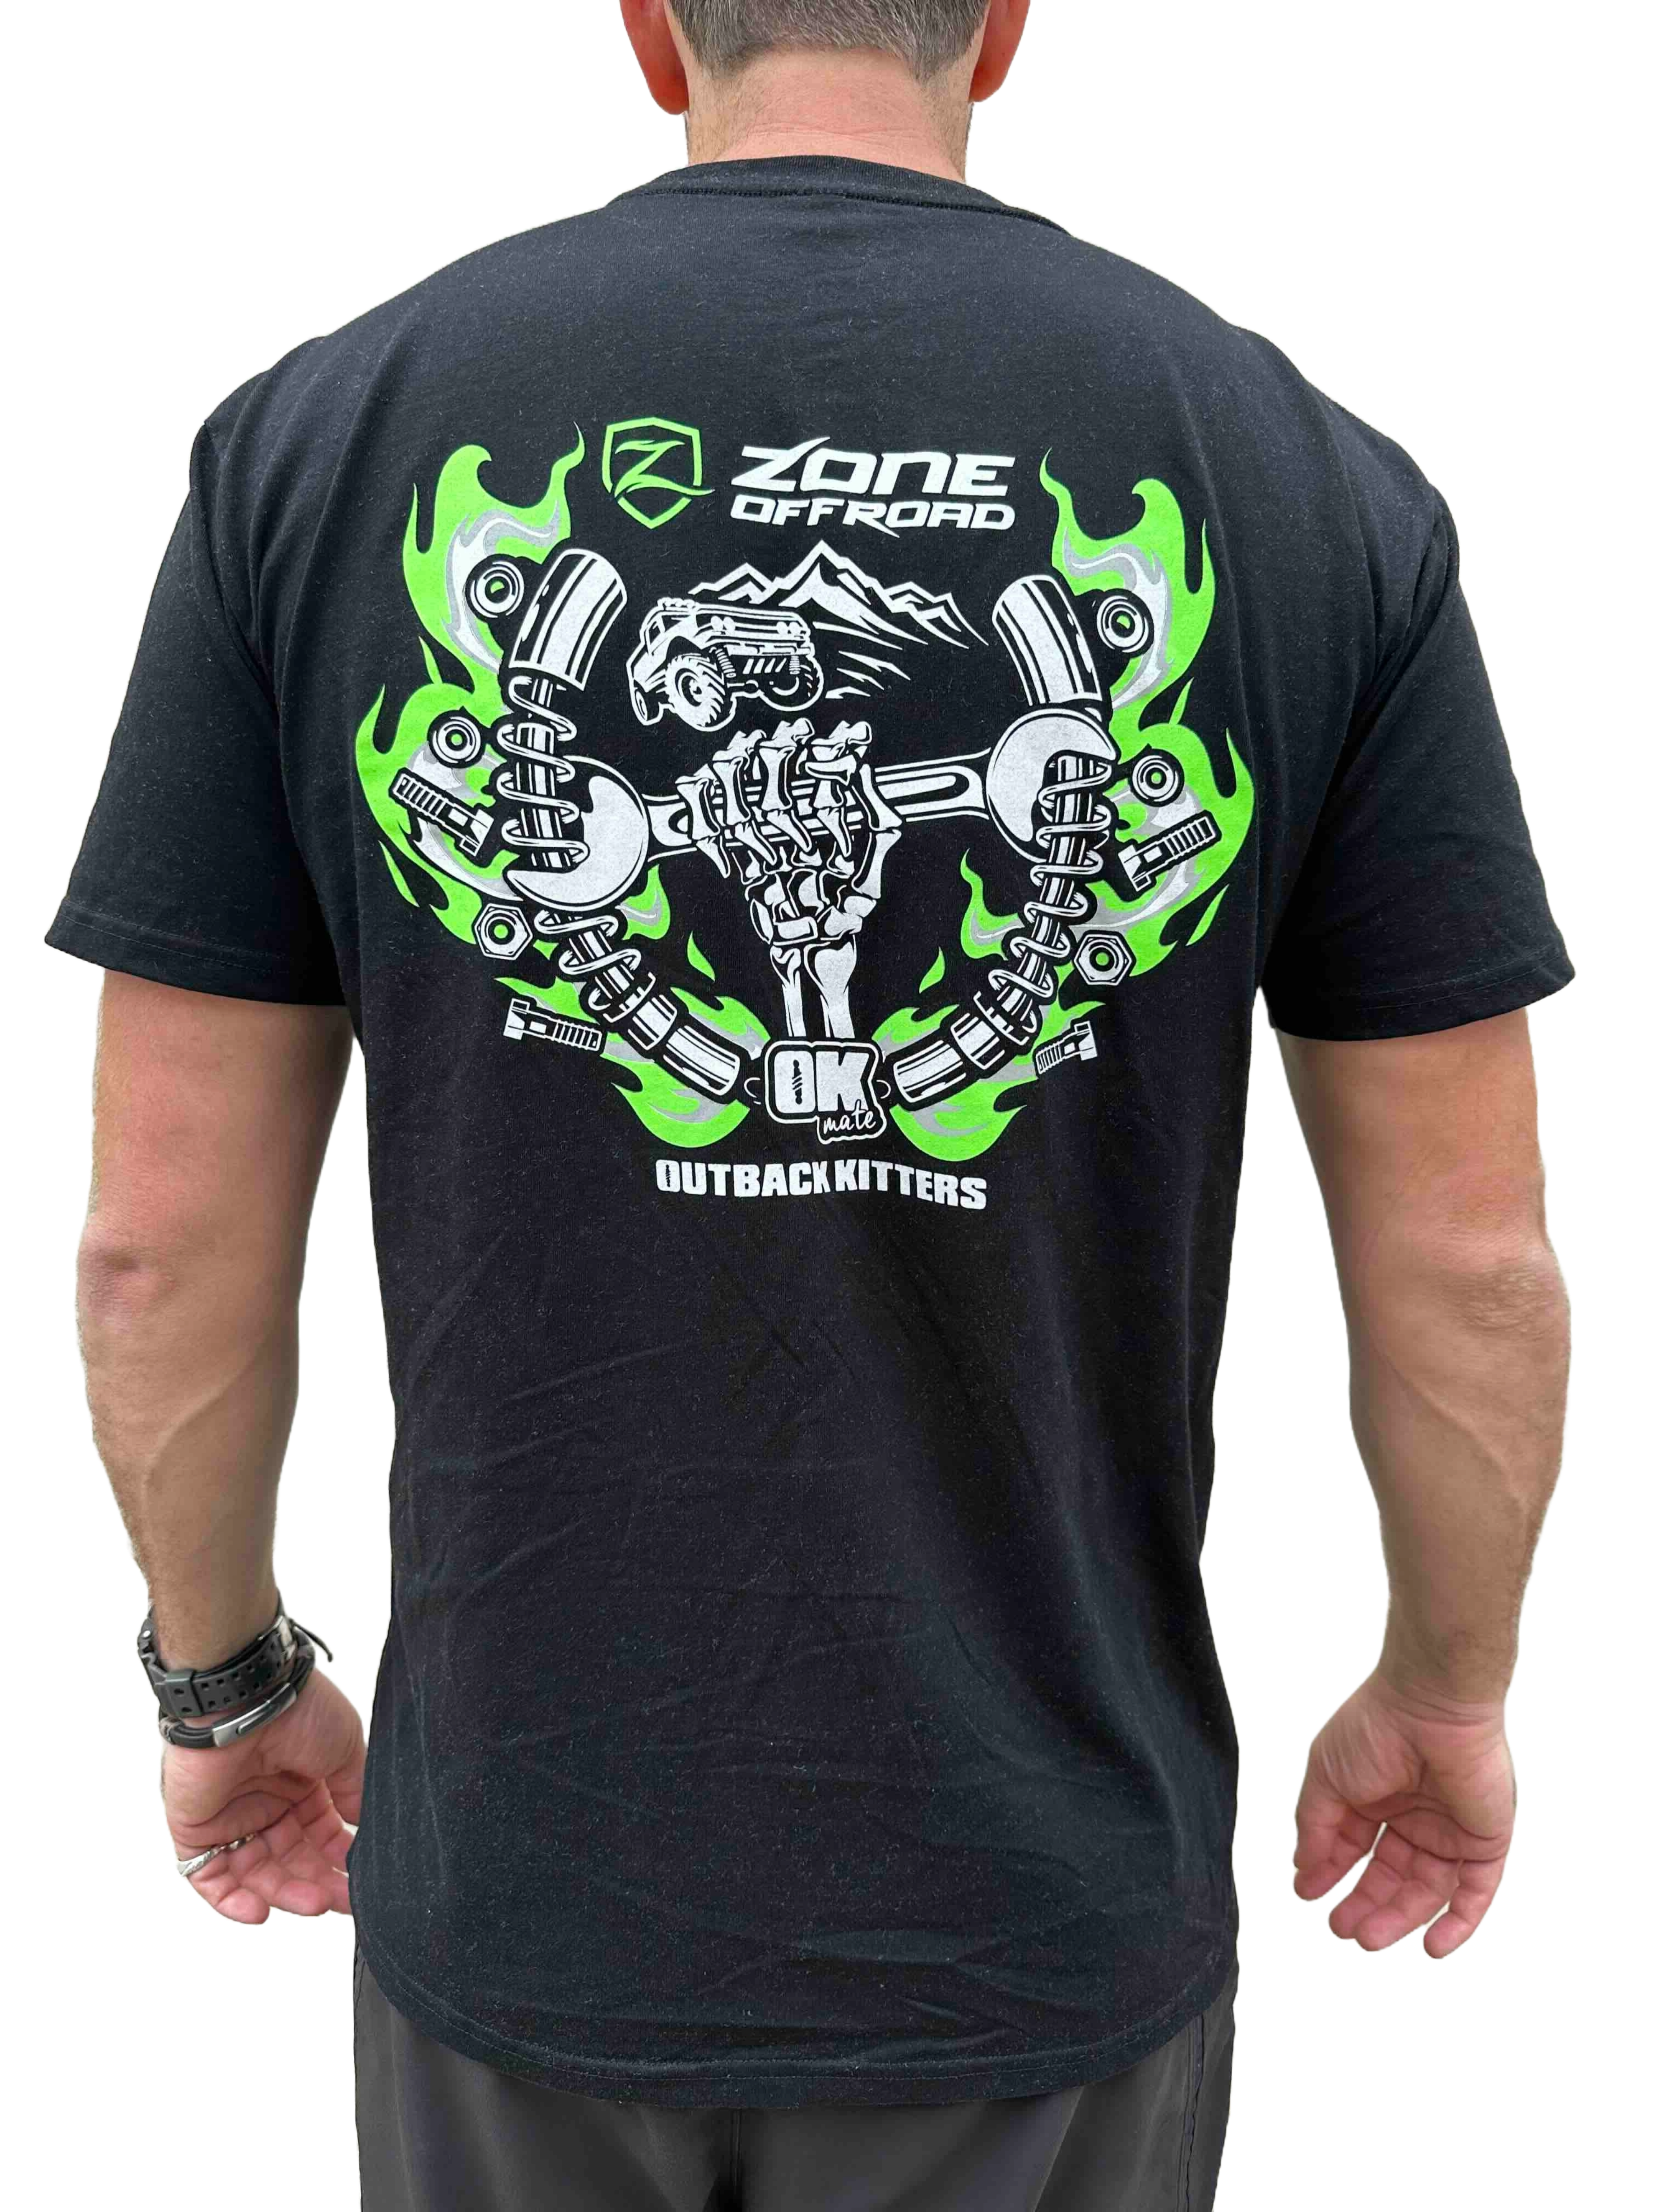 Outback Kitters x Zone Offroad 'Brothers in Arms' Tee - Outback Kitters